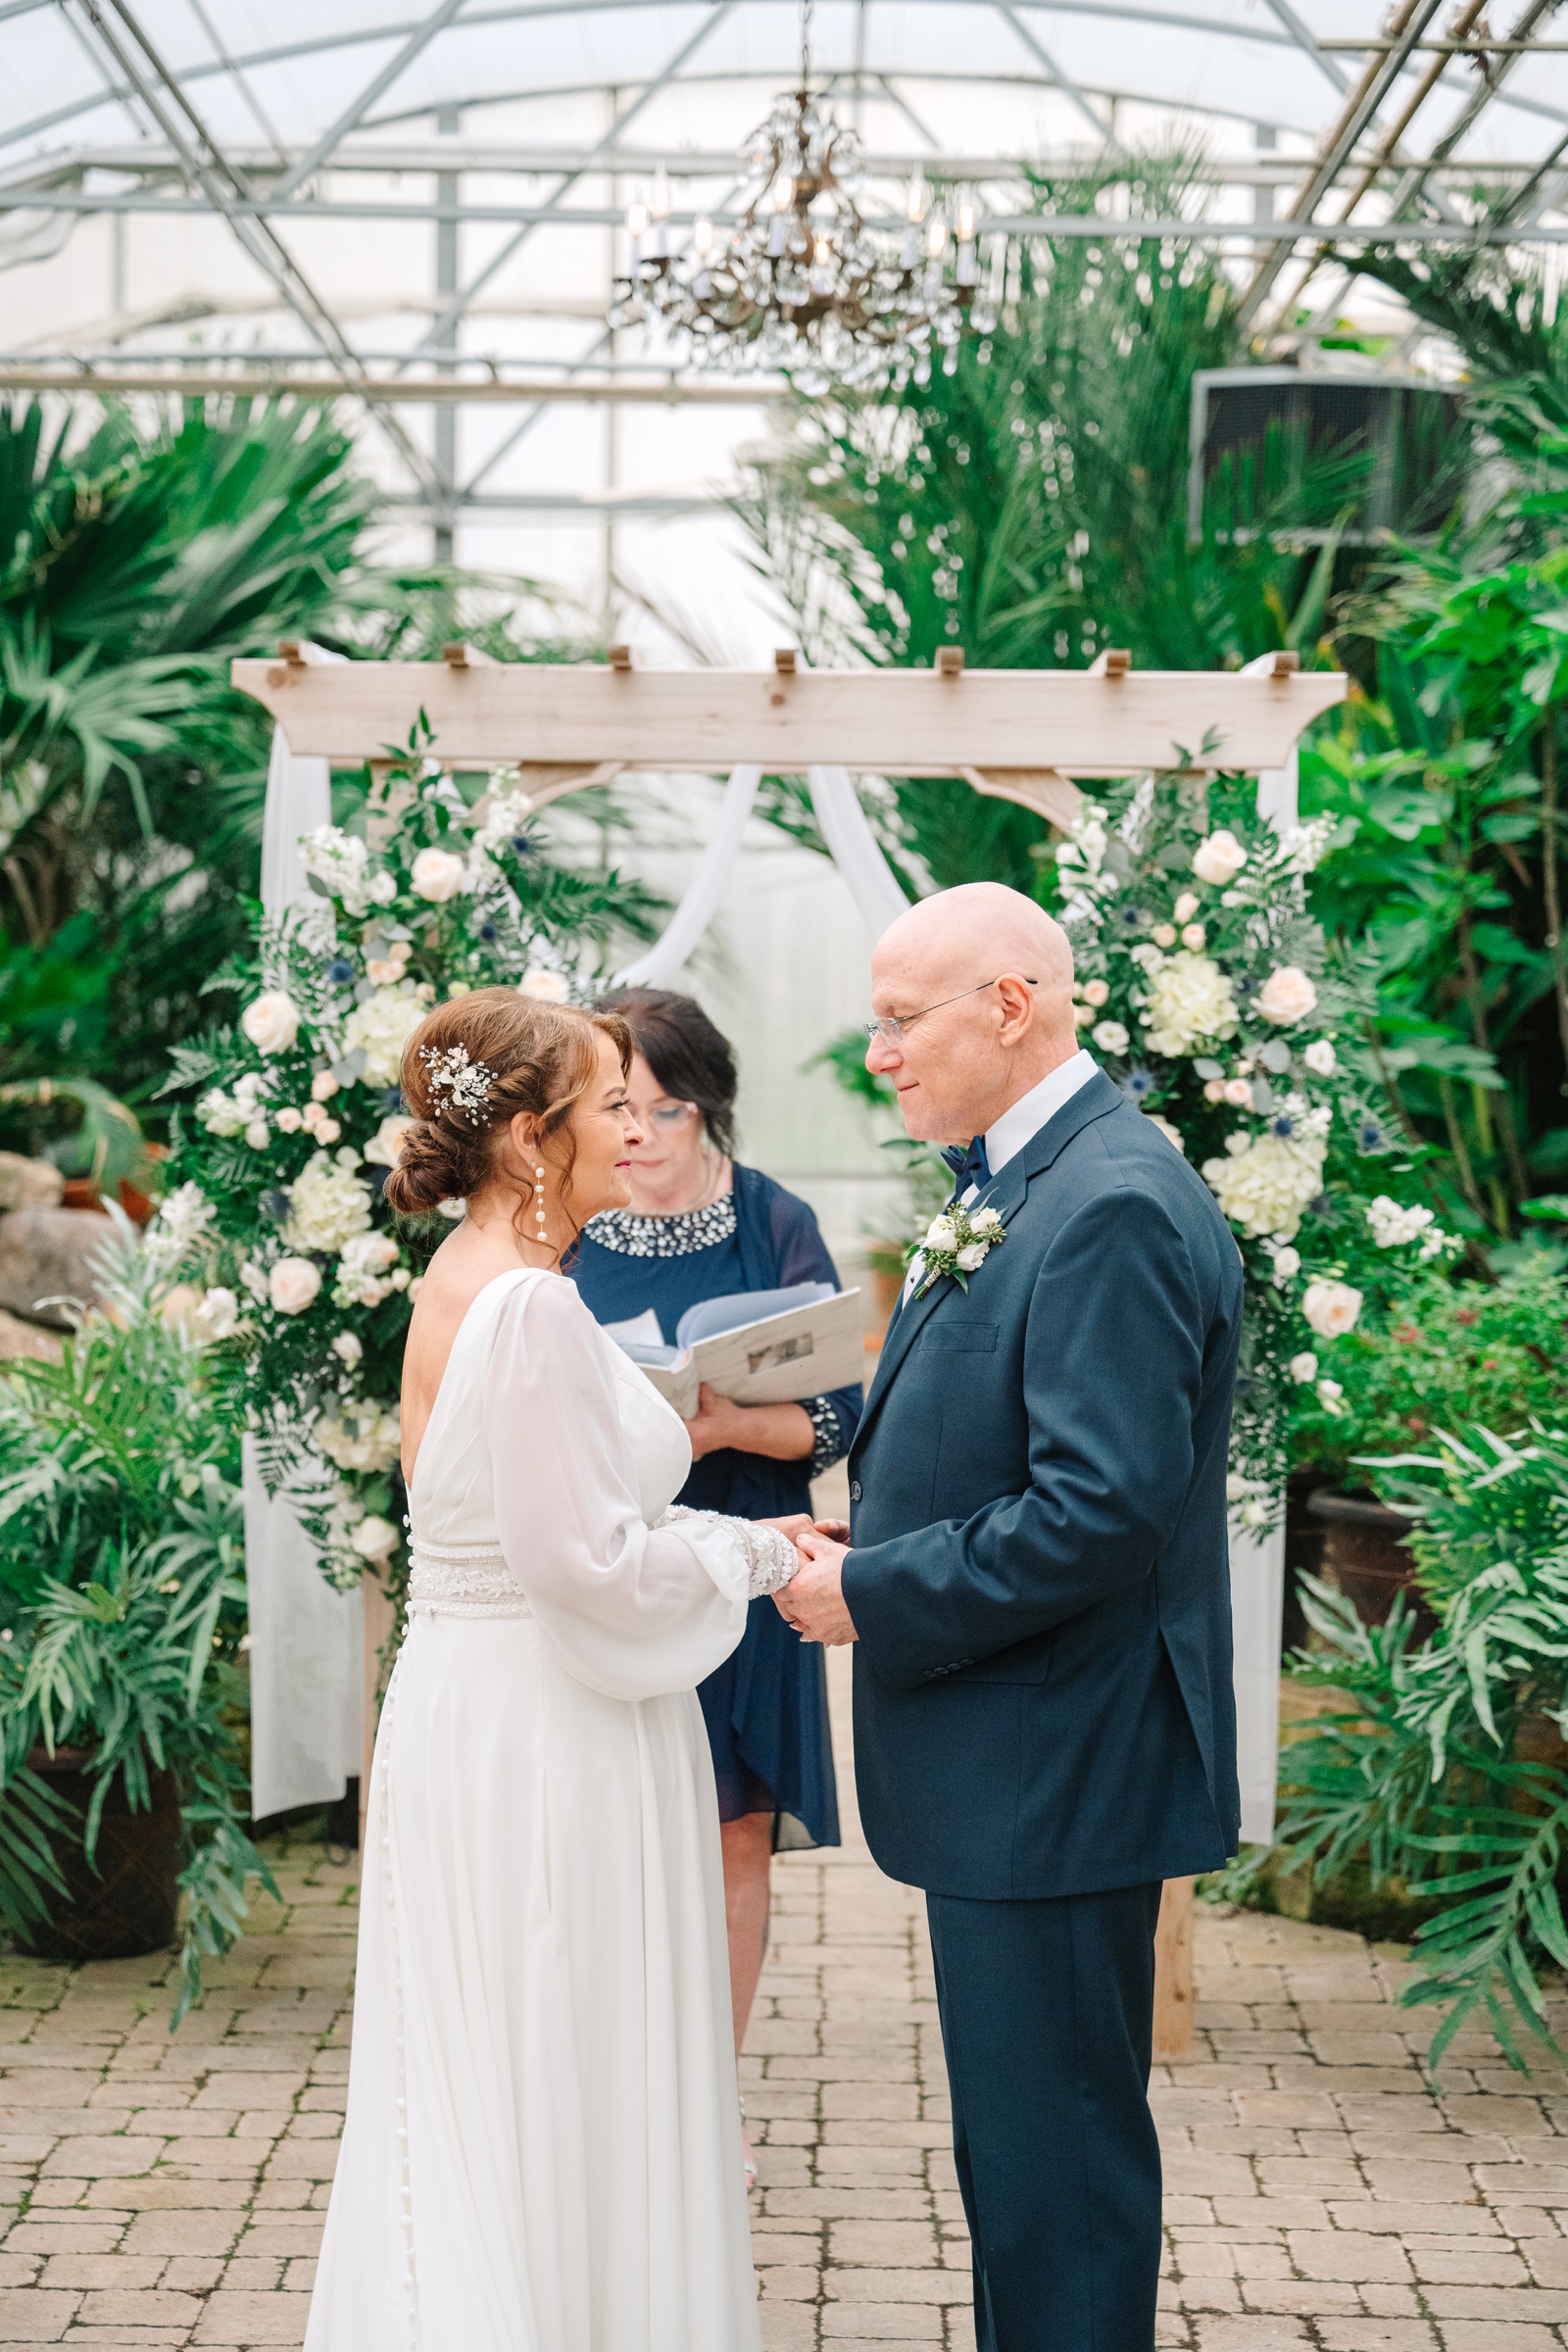 Mohican Garden and Conservatory Greenhouse Wedding in Ohio